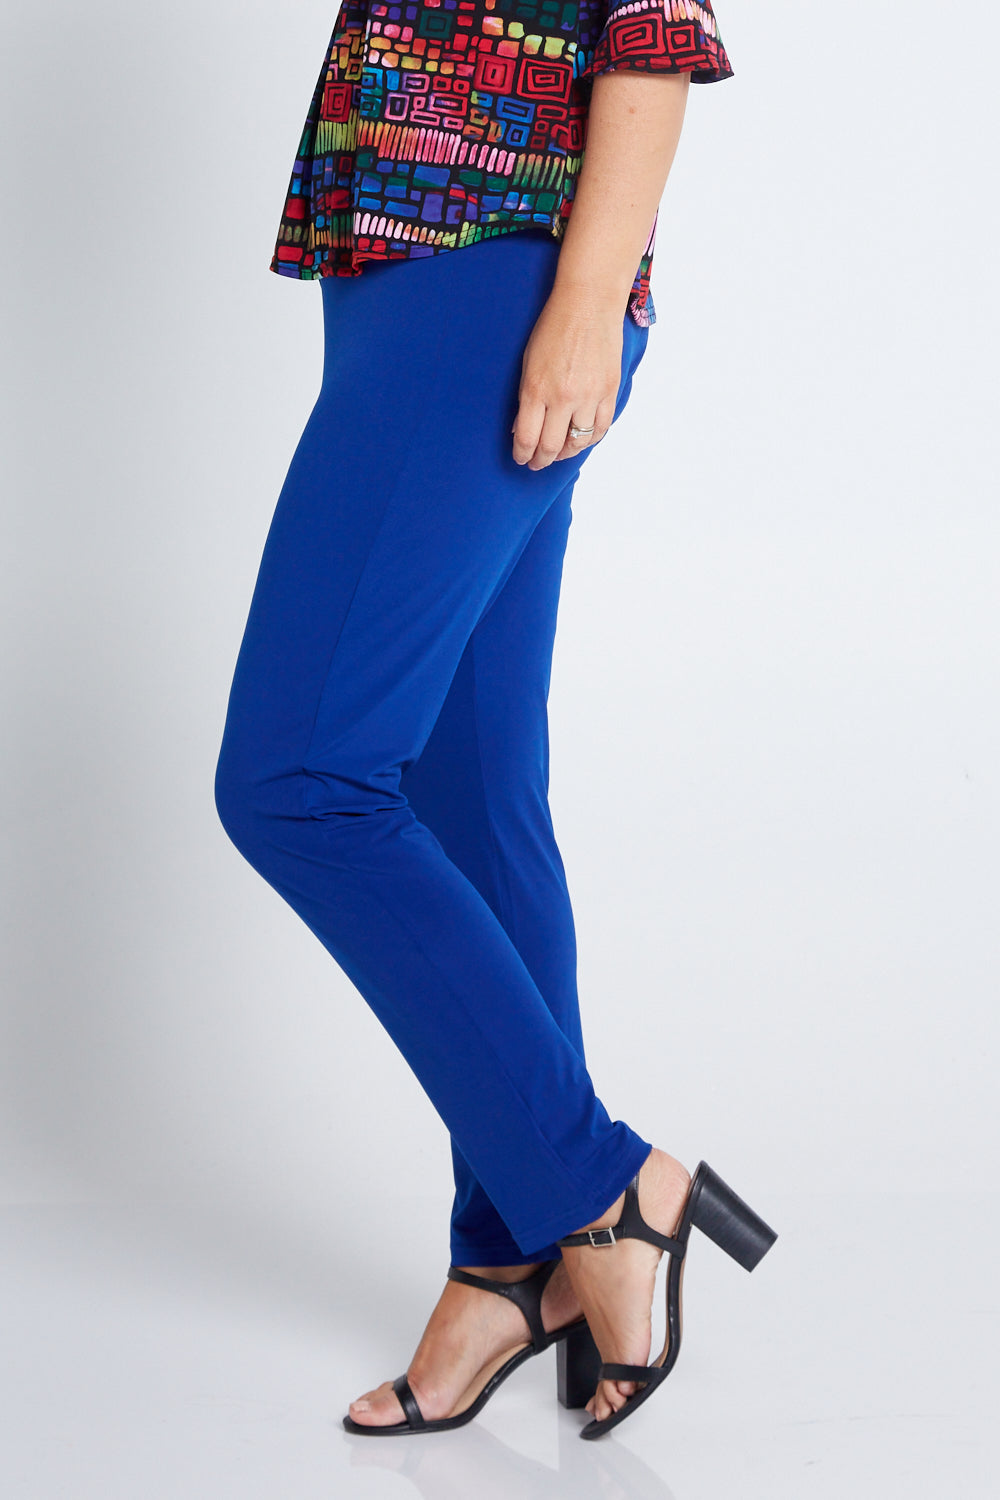 Royal blue printed top with pants - set of two by Suramya | The Secret Label